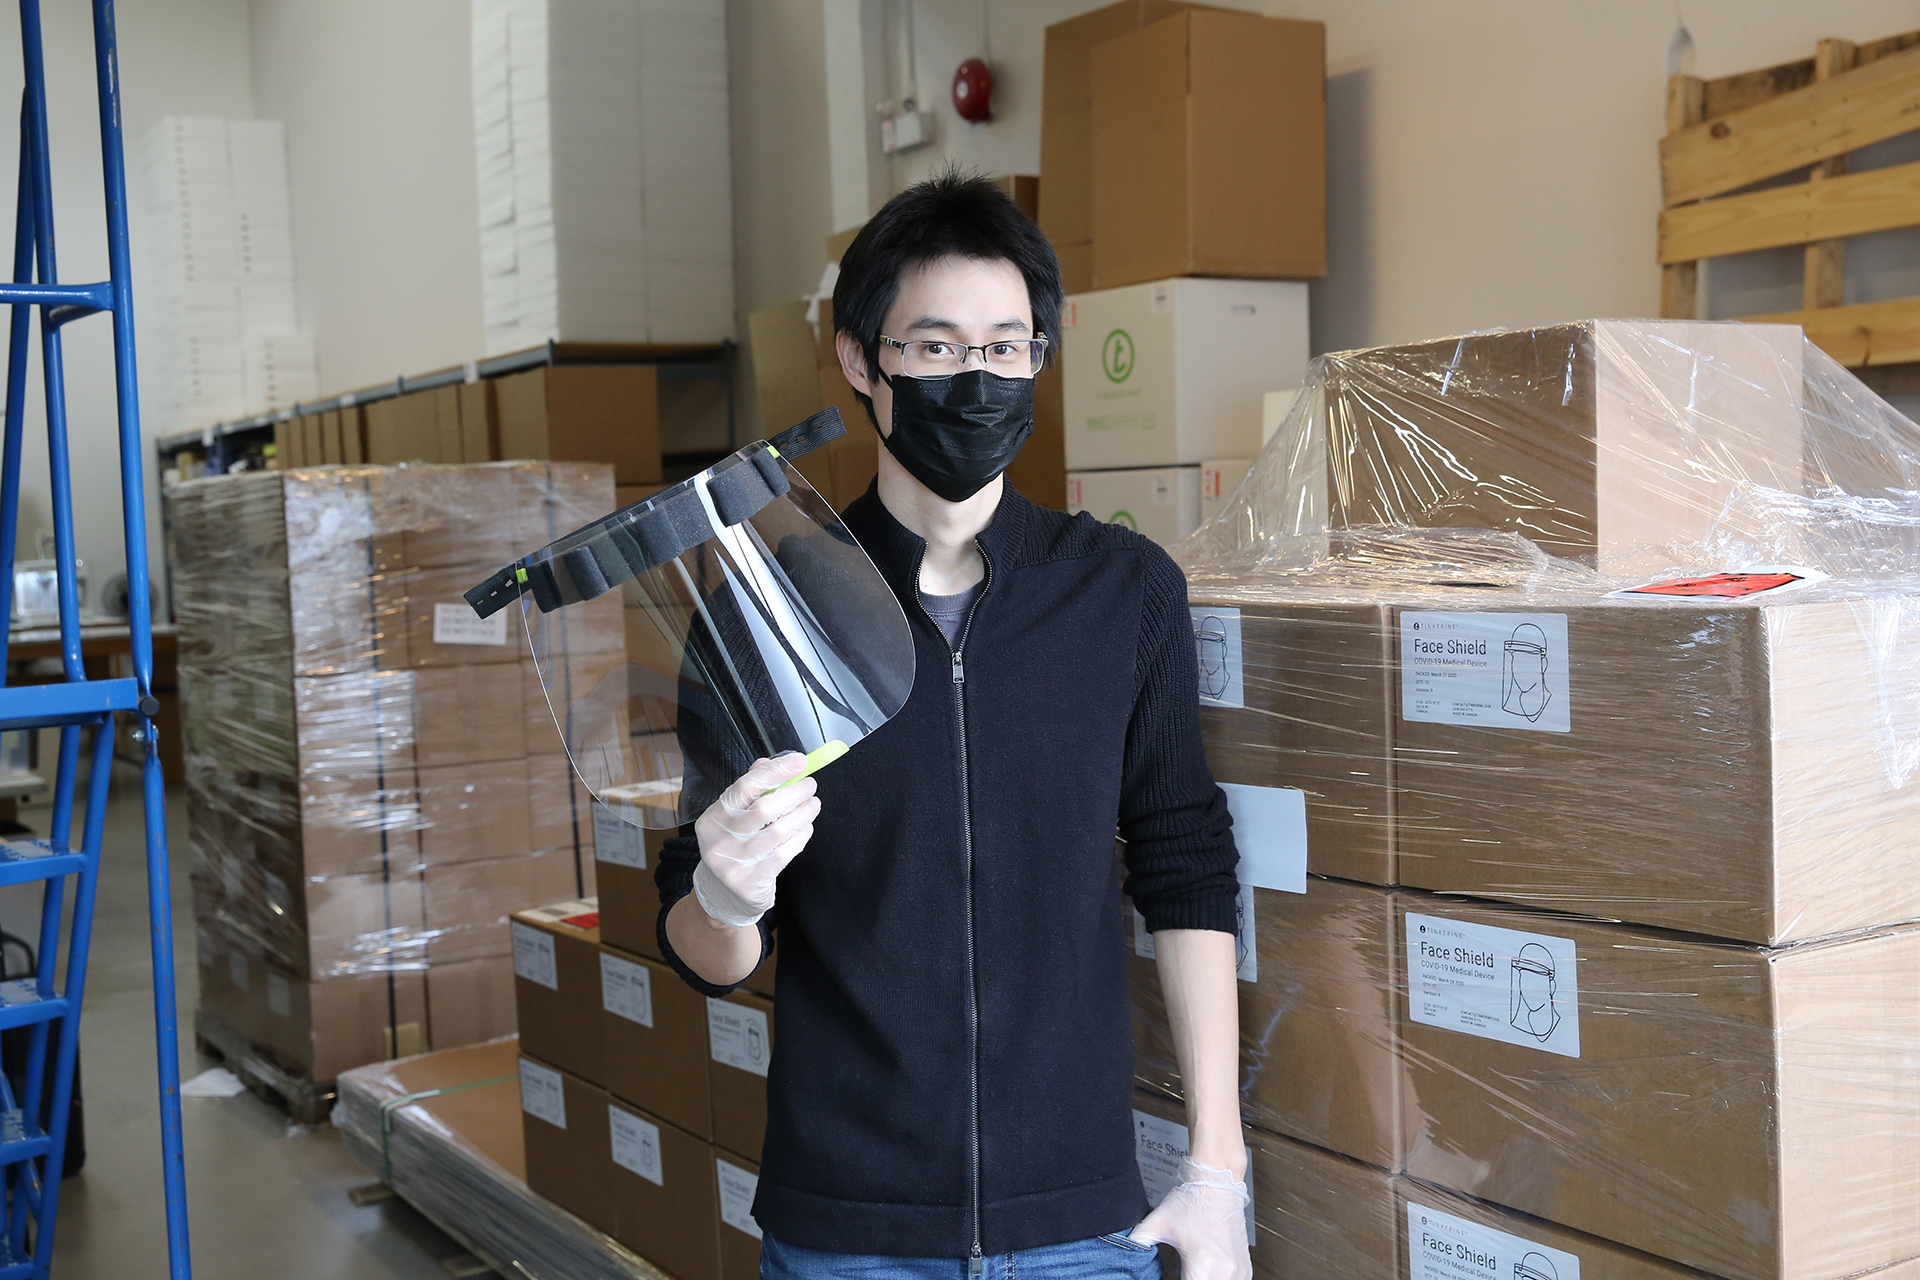 A tinkerine employee shows off a face shield, in front of boxes of face shields for the deaf and hard of hearing